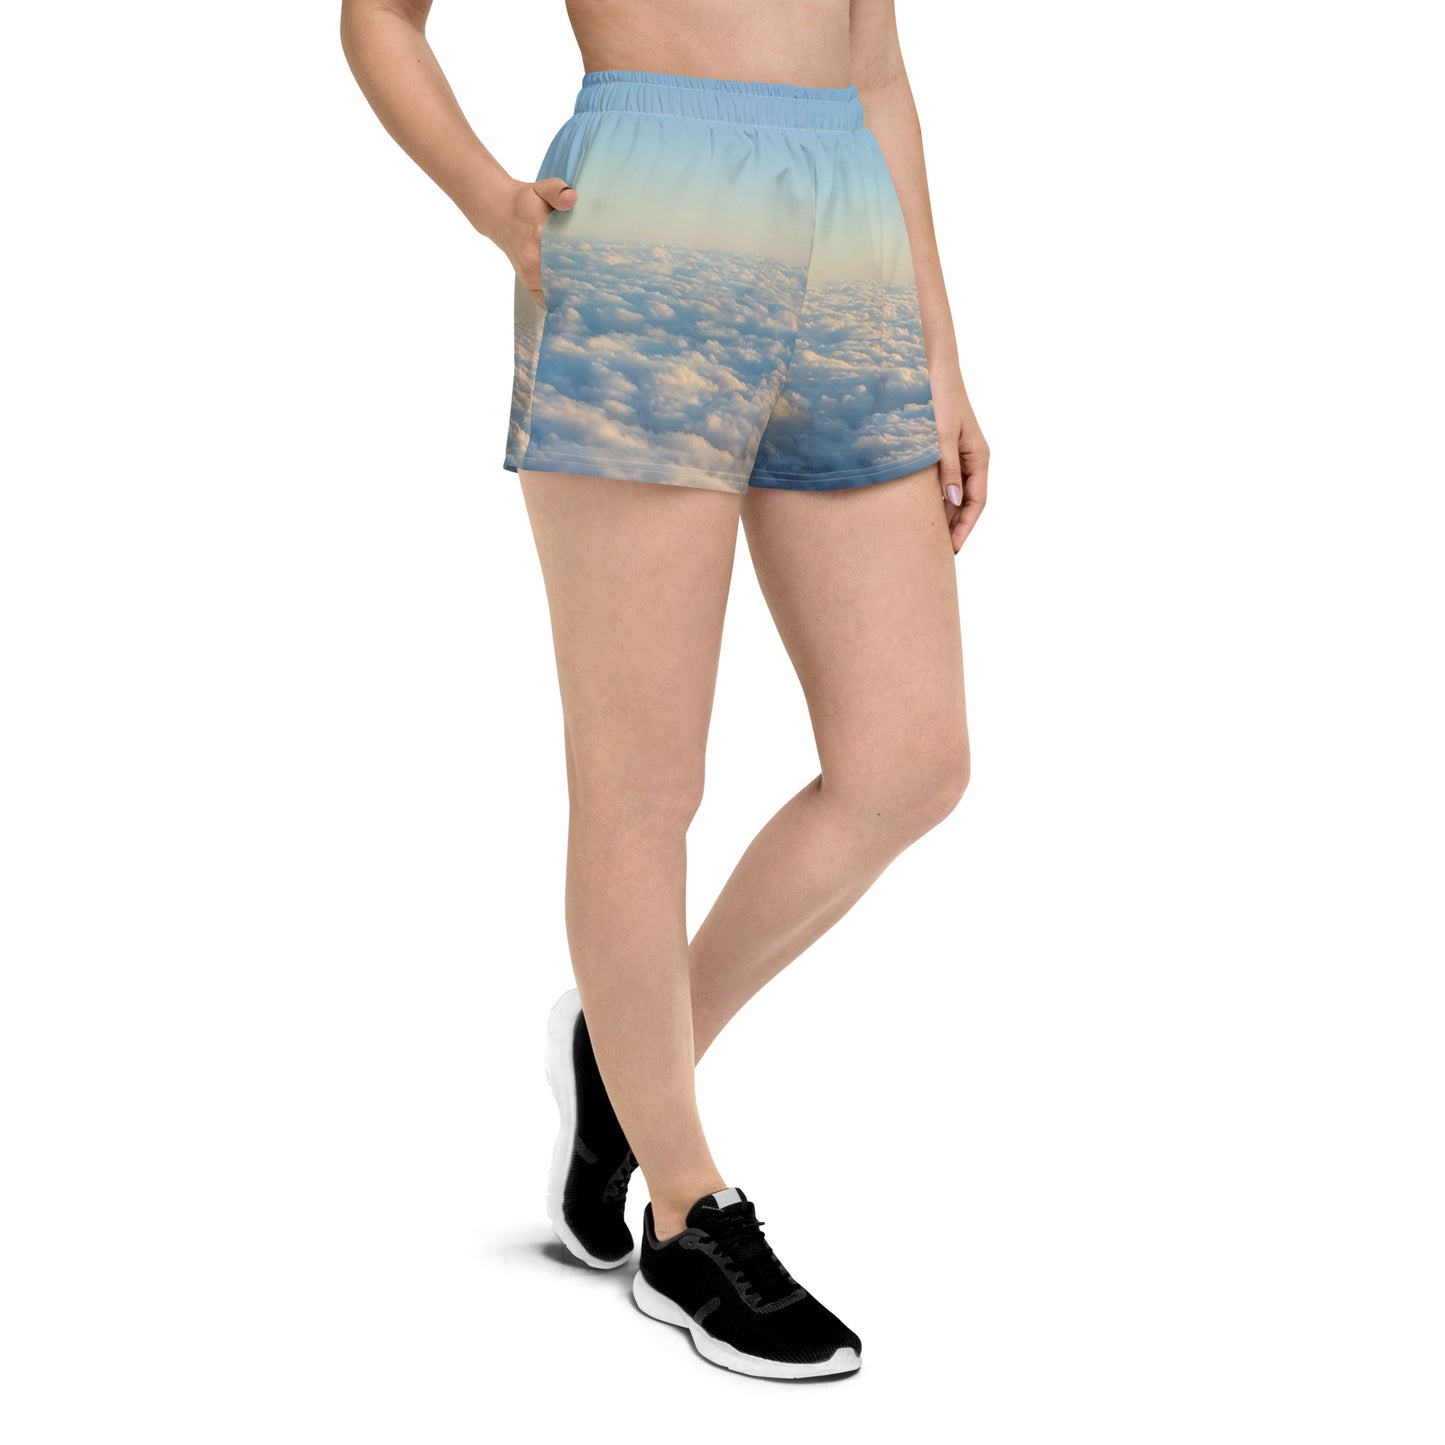 New Heights Women’s Recycled Athletic shorts